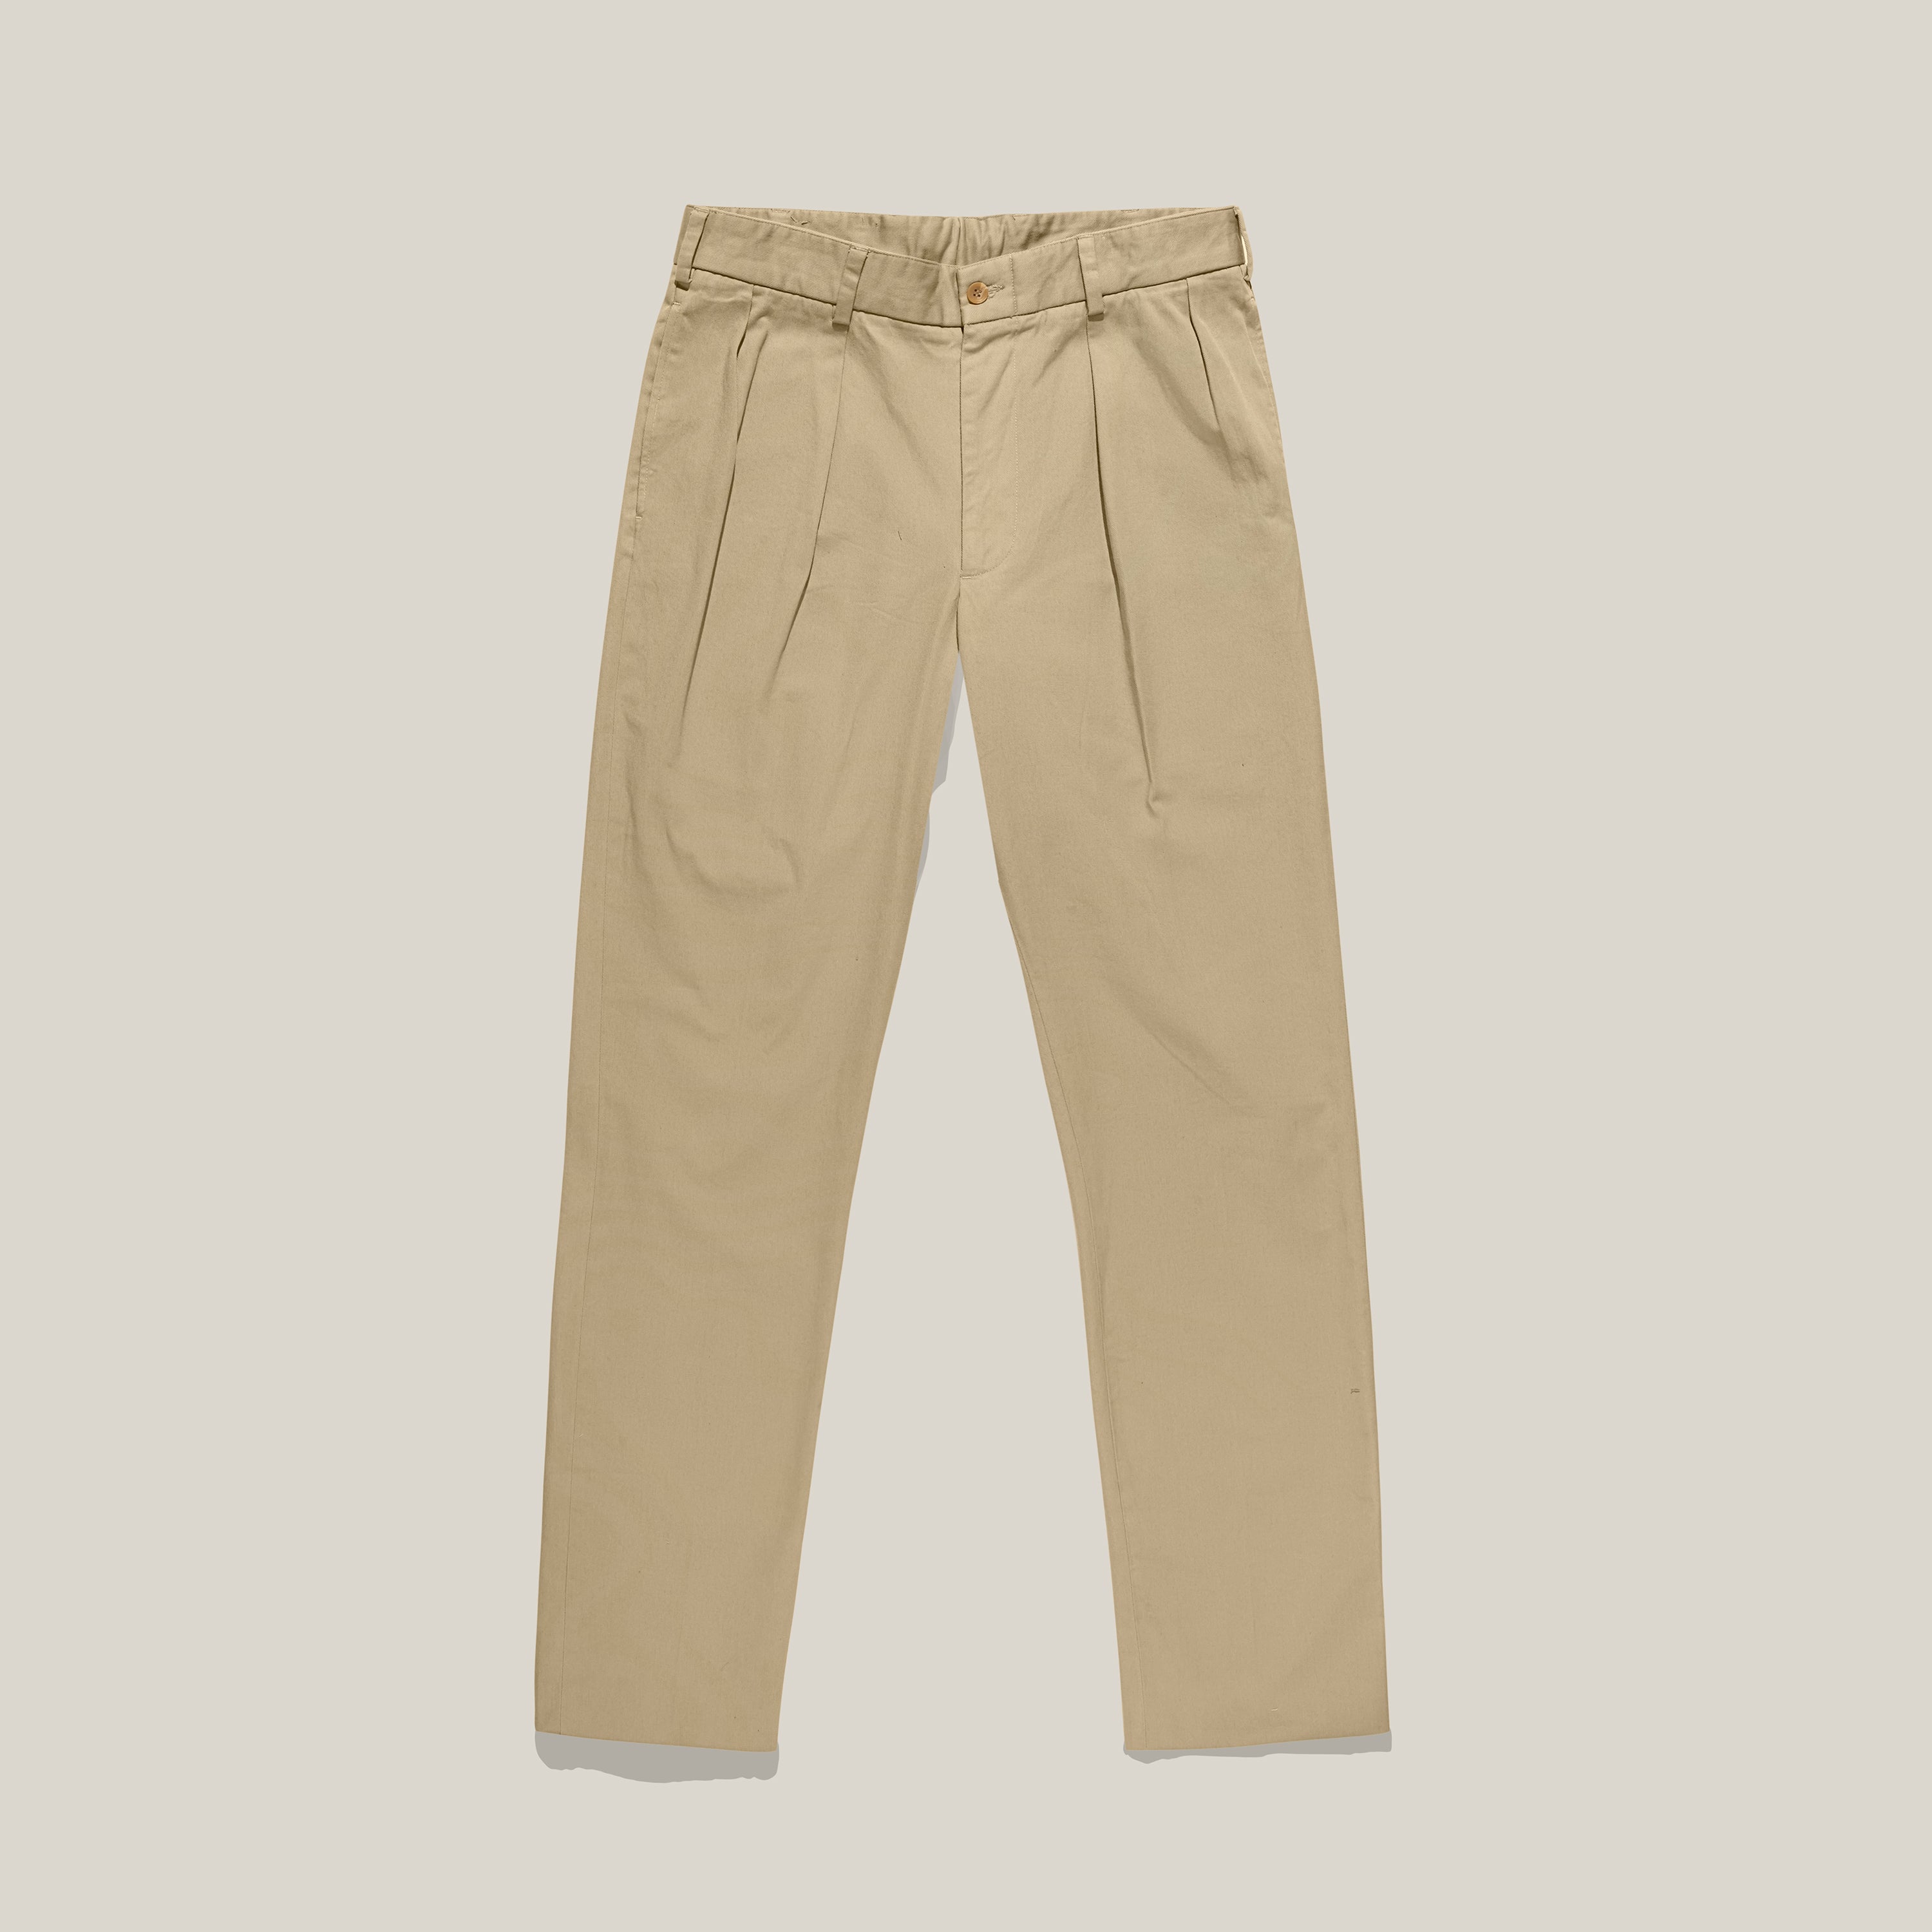 M1P - Relaxed Fit Pleated - Original Twill – Bills Khakis